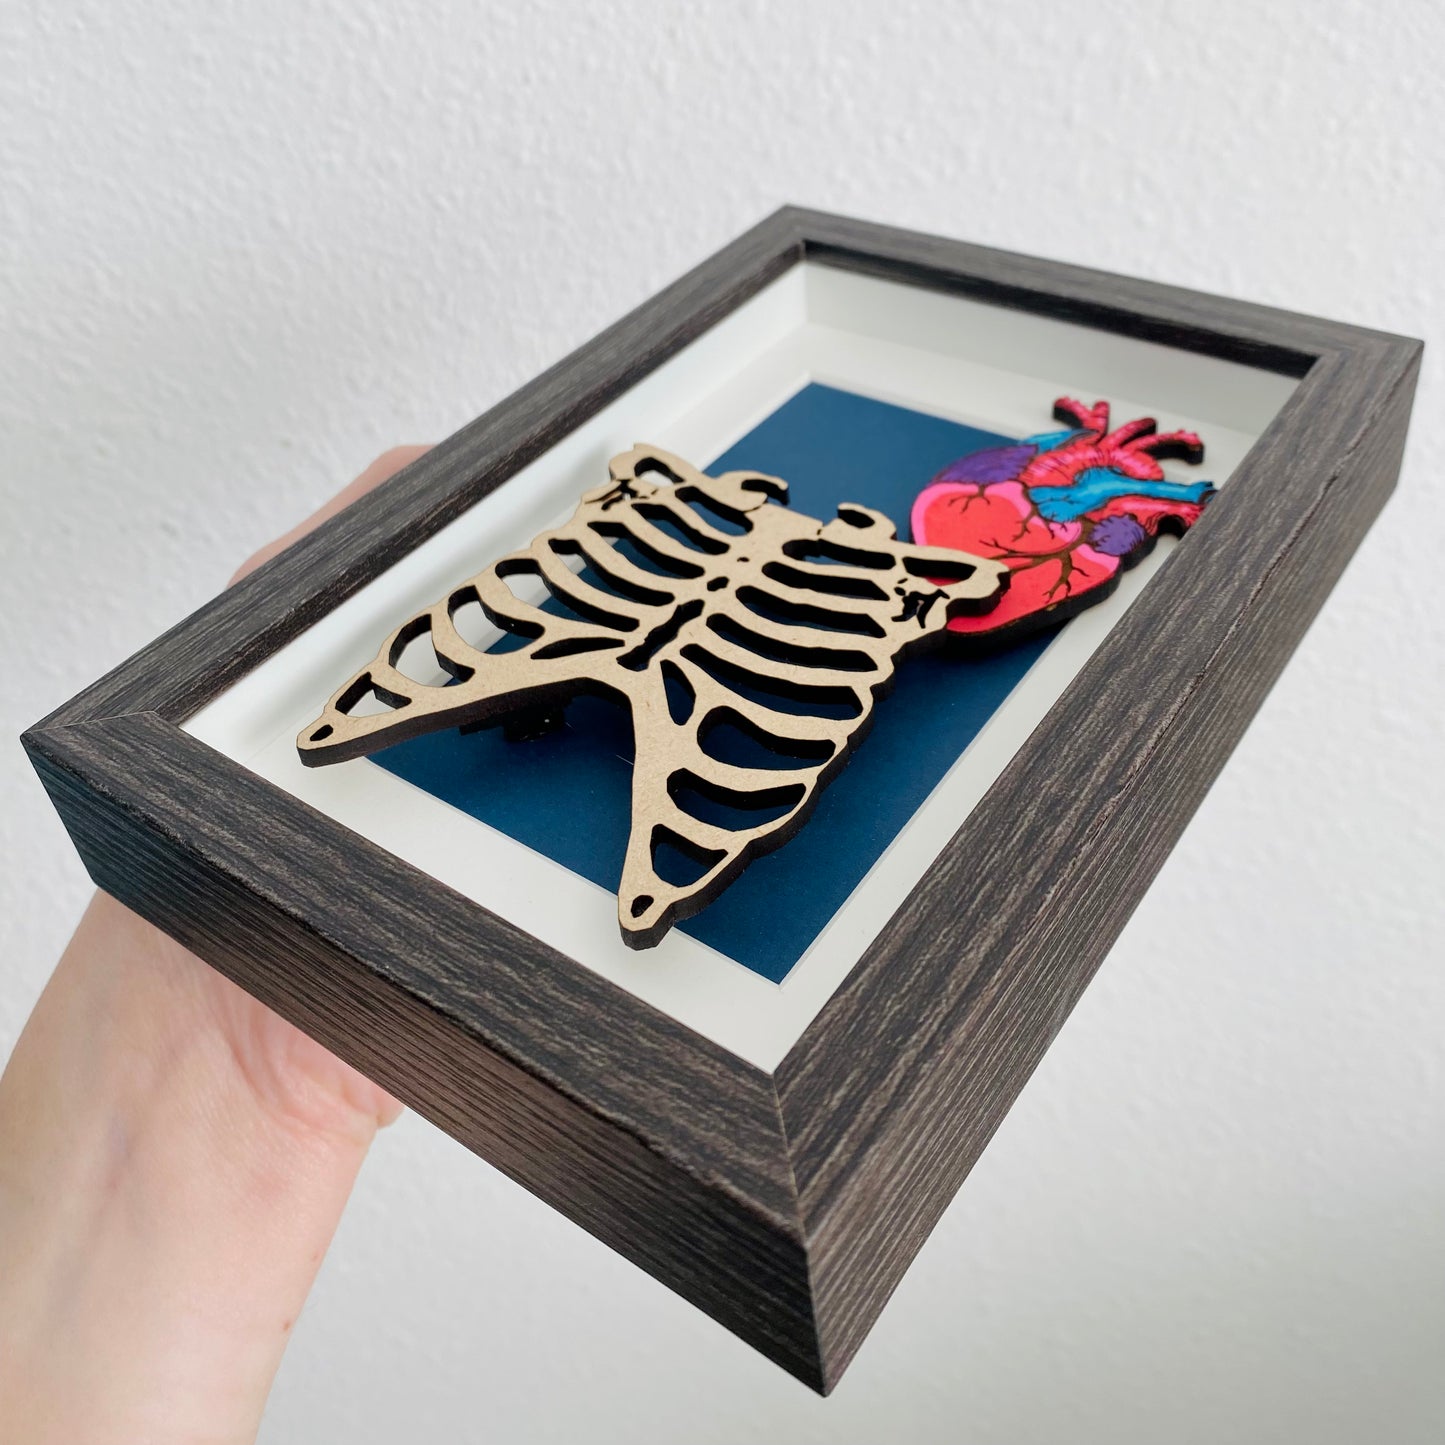 Ribcage + Anatomical Heart Woodcut Framed Painting